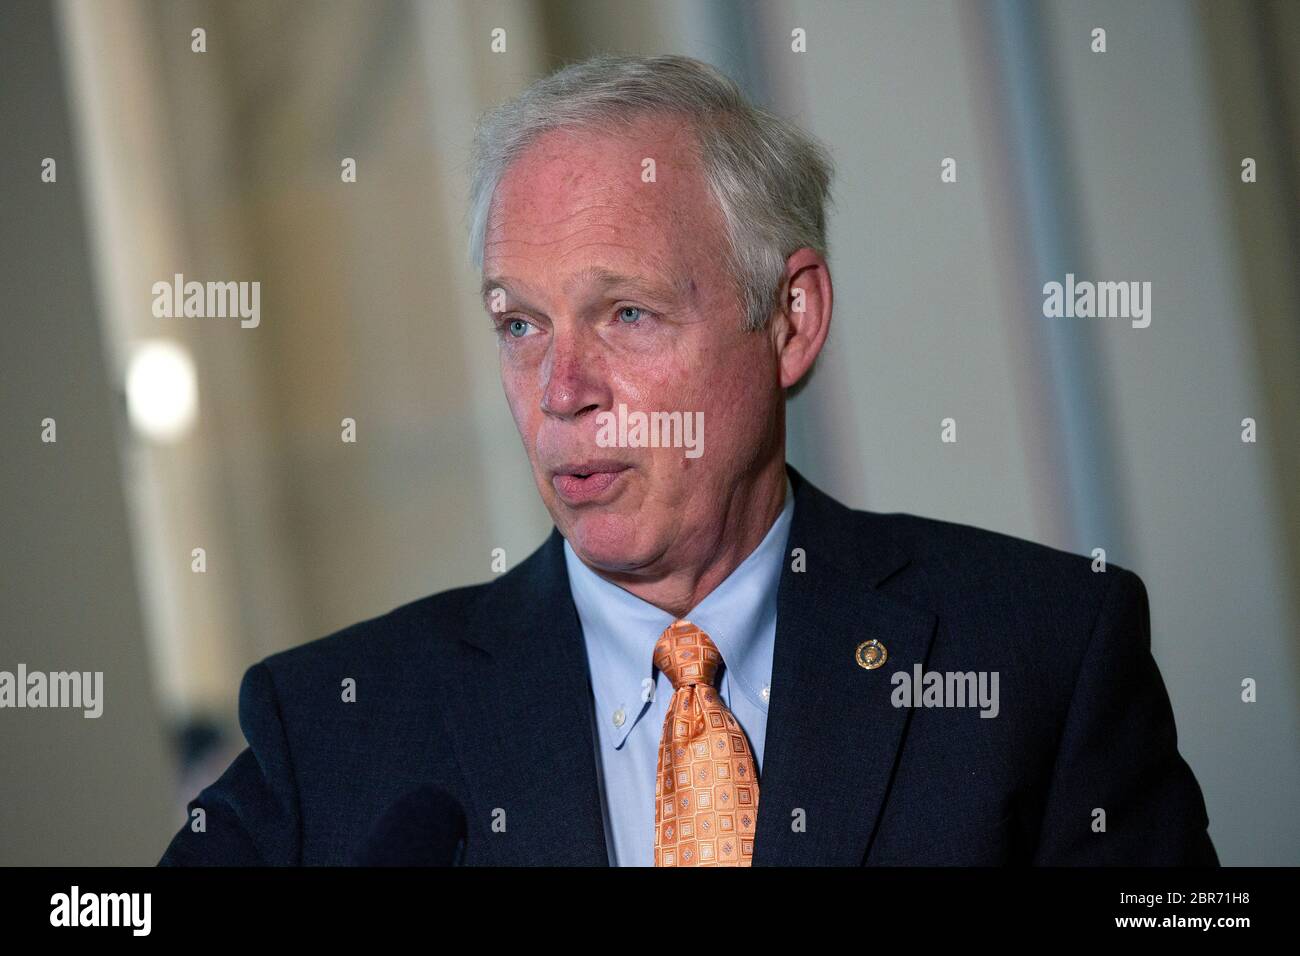 United States Senator Ron Johnson (Republican of Wisconsin) speaks to members of the media prior to a U.S. Senate Committee on Homeland Security and Governmental Affairs meeting in the Senate Russell Office Building in Washington, DC, U.S., on Wednesday, May 20, 2020, as the committee considers a motion to issue a subpoena to Blue Star Strategies. Credit: Stefani Reynolds/CNP /MediaPunch Stock Photo